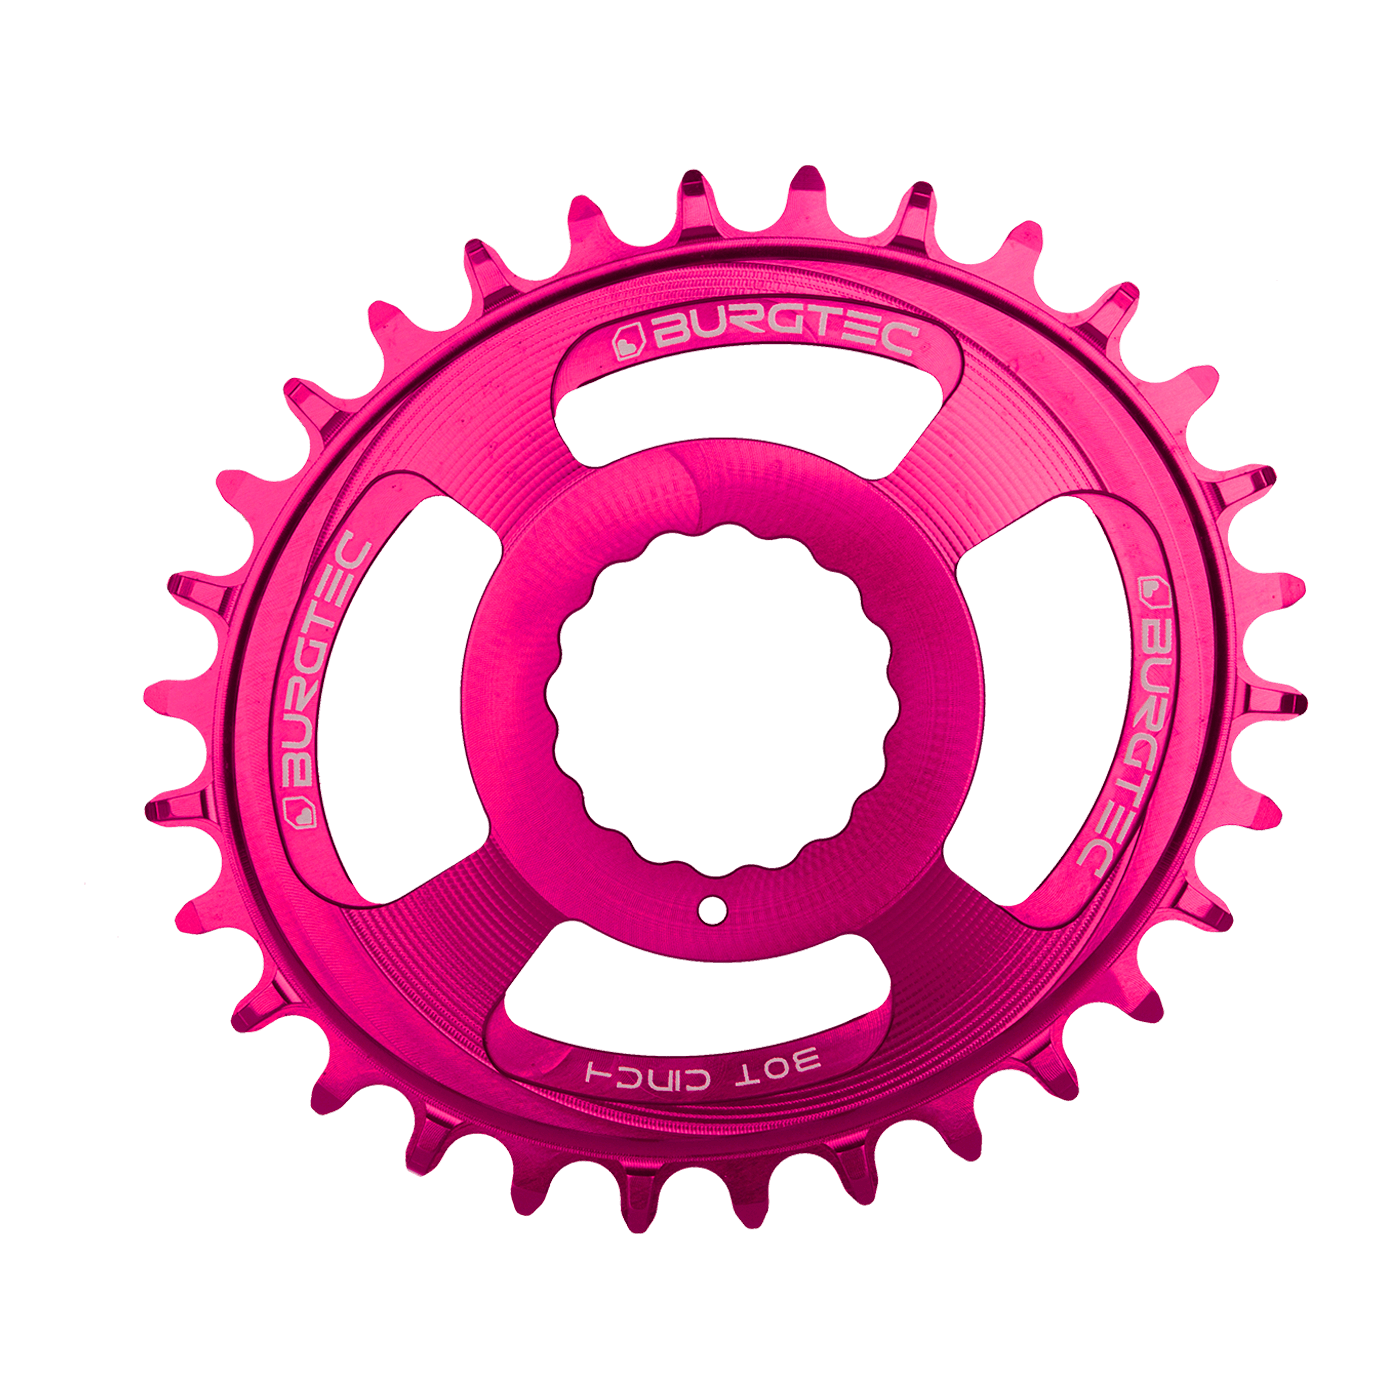 Burgtec Cinch Oval Thick Thin Chainring